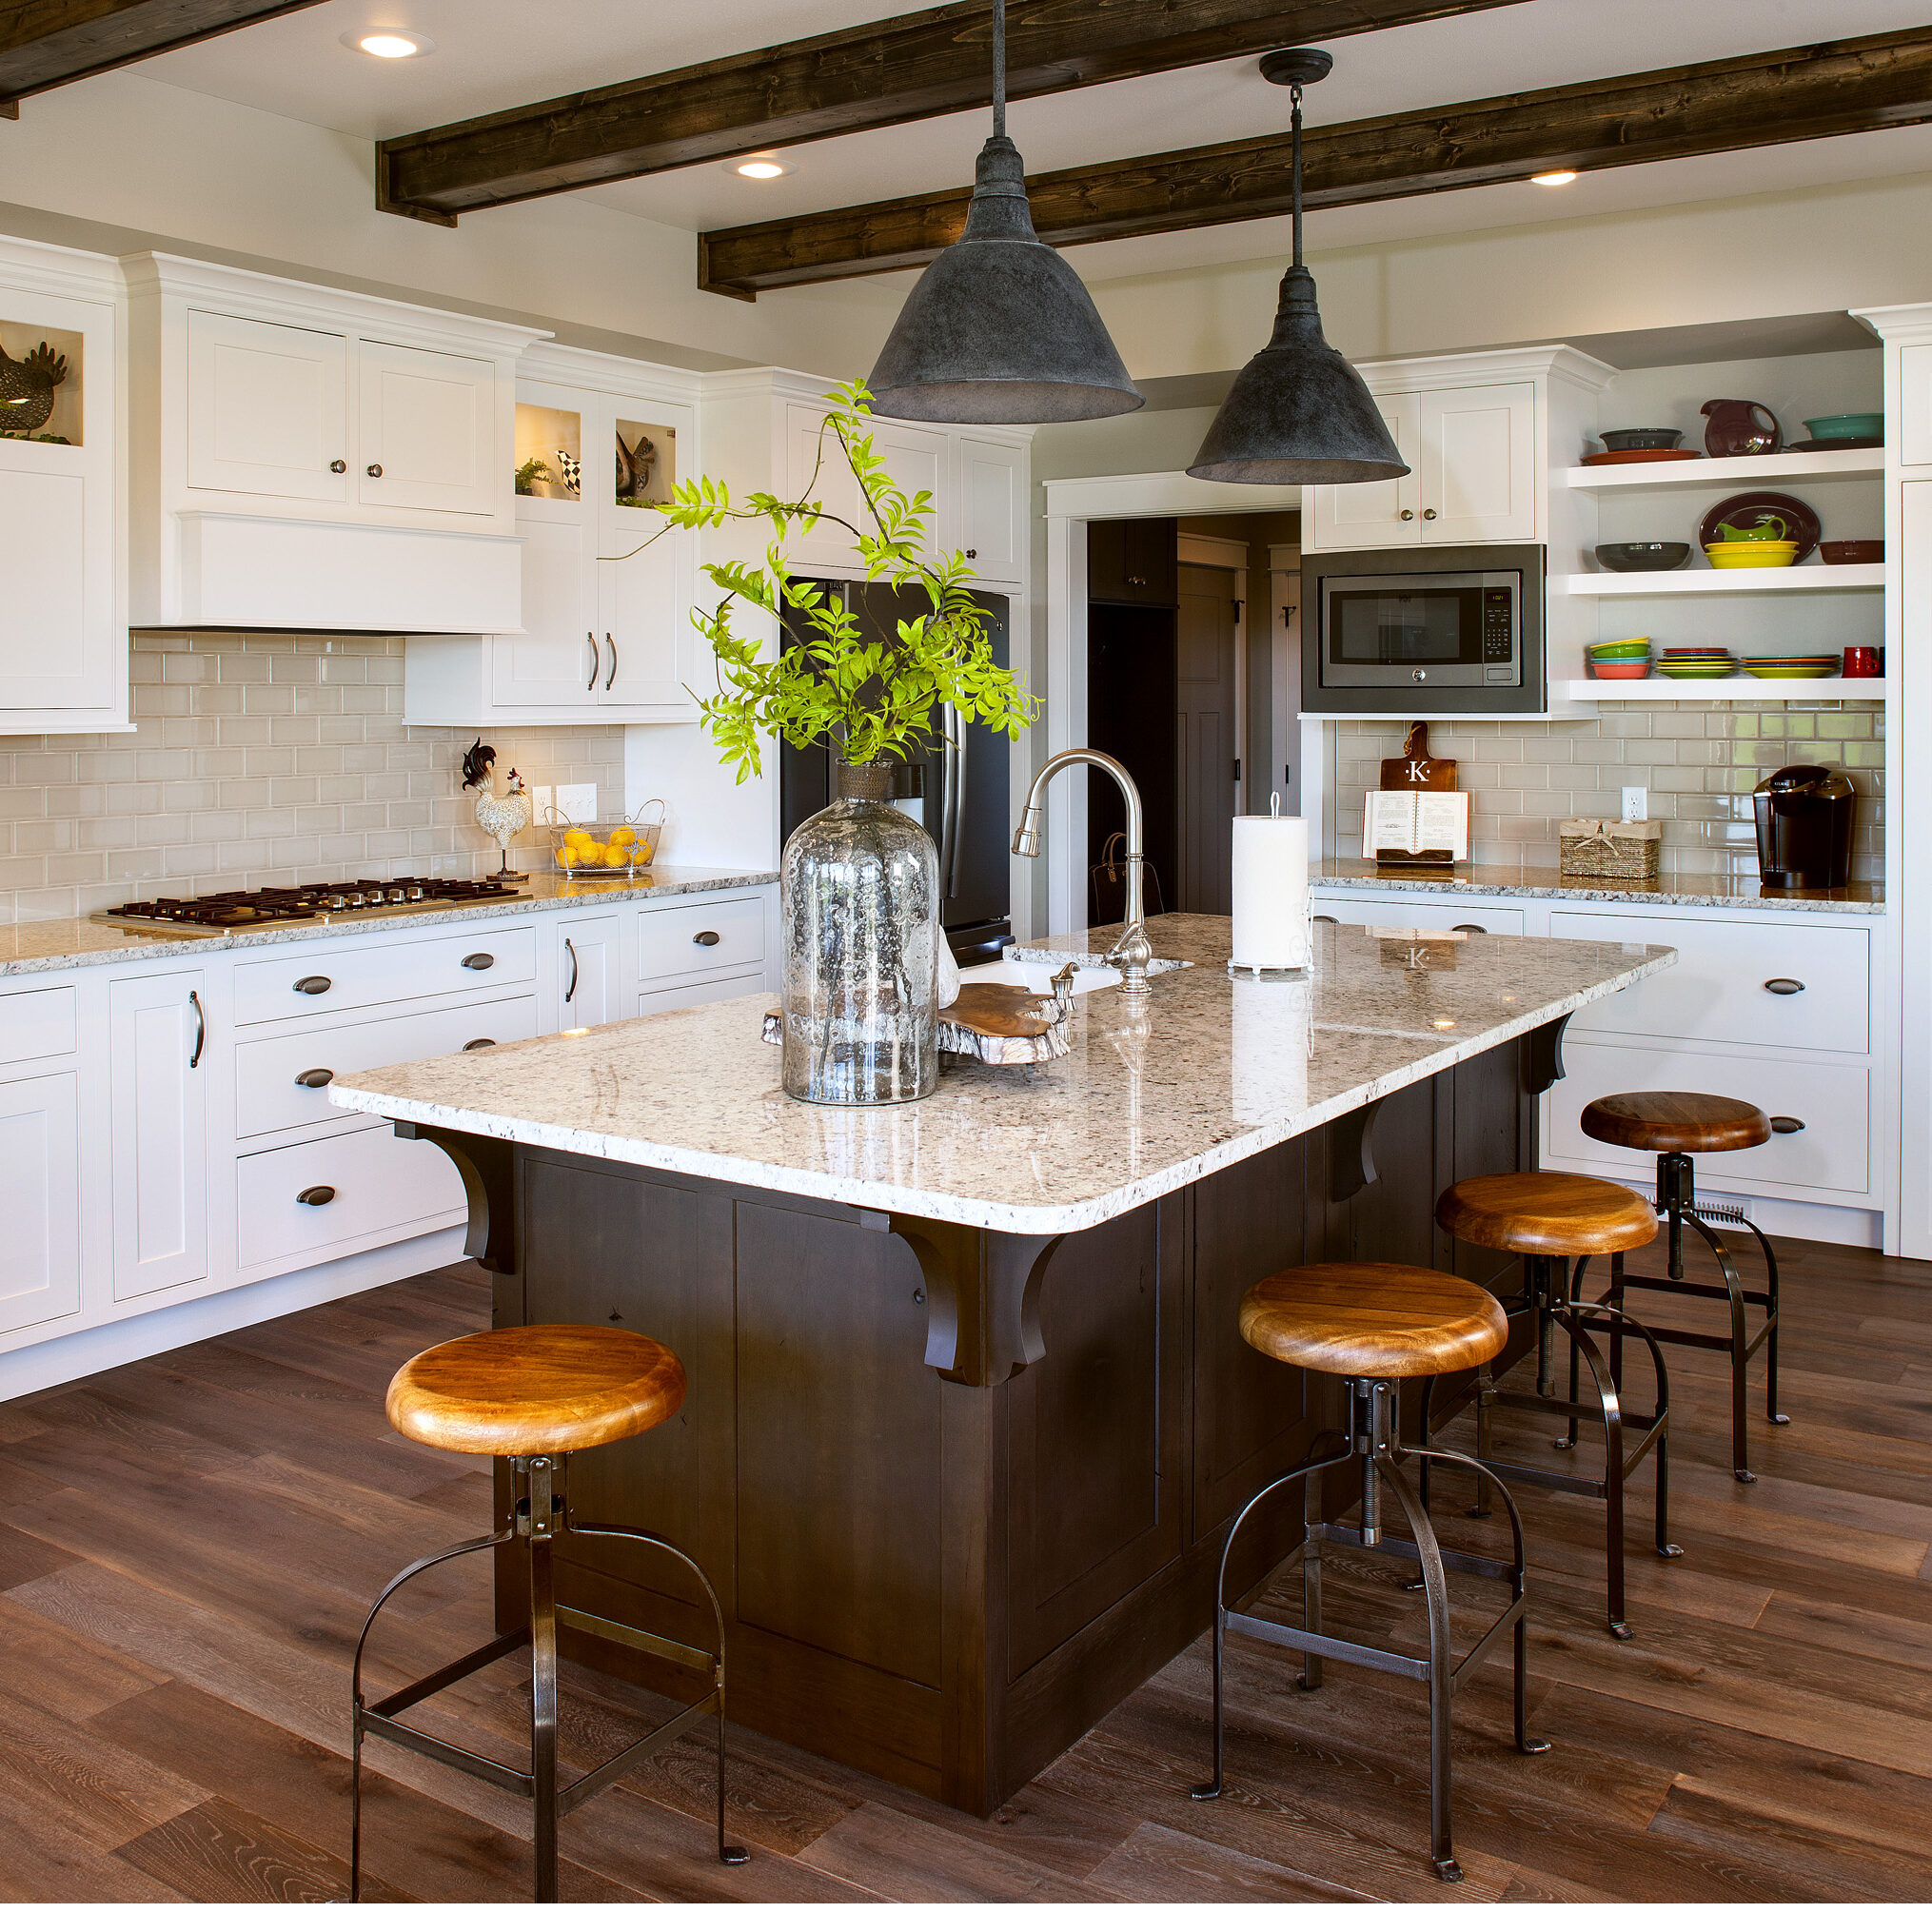 Custom Cabinetry to Fit Your Needs